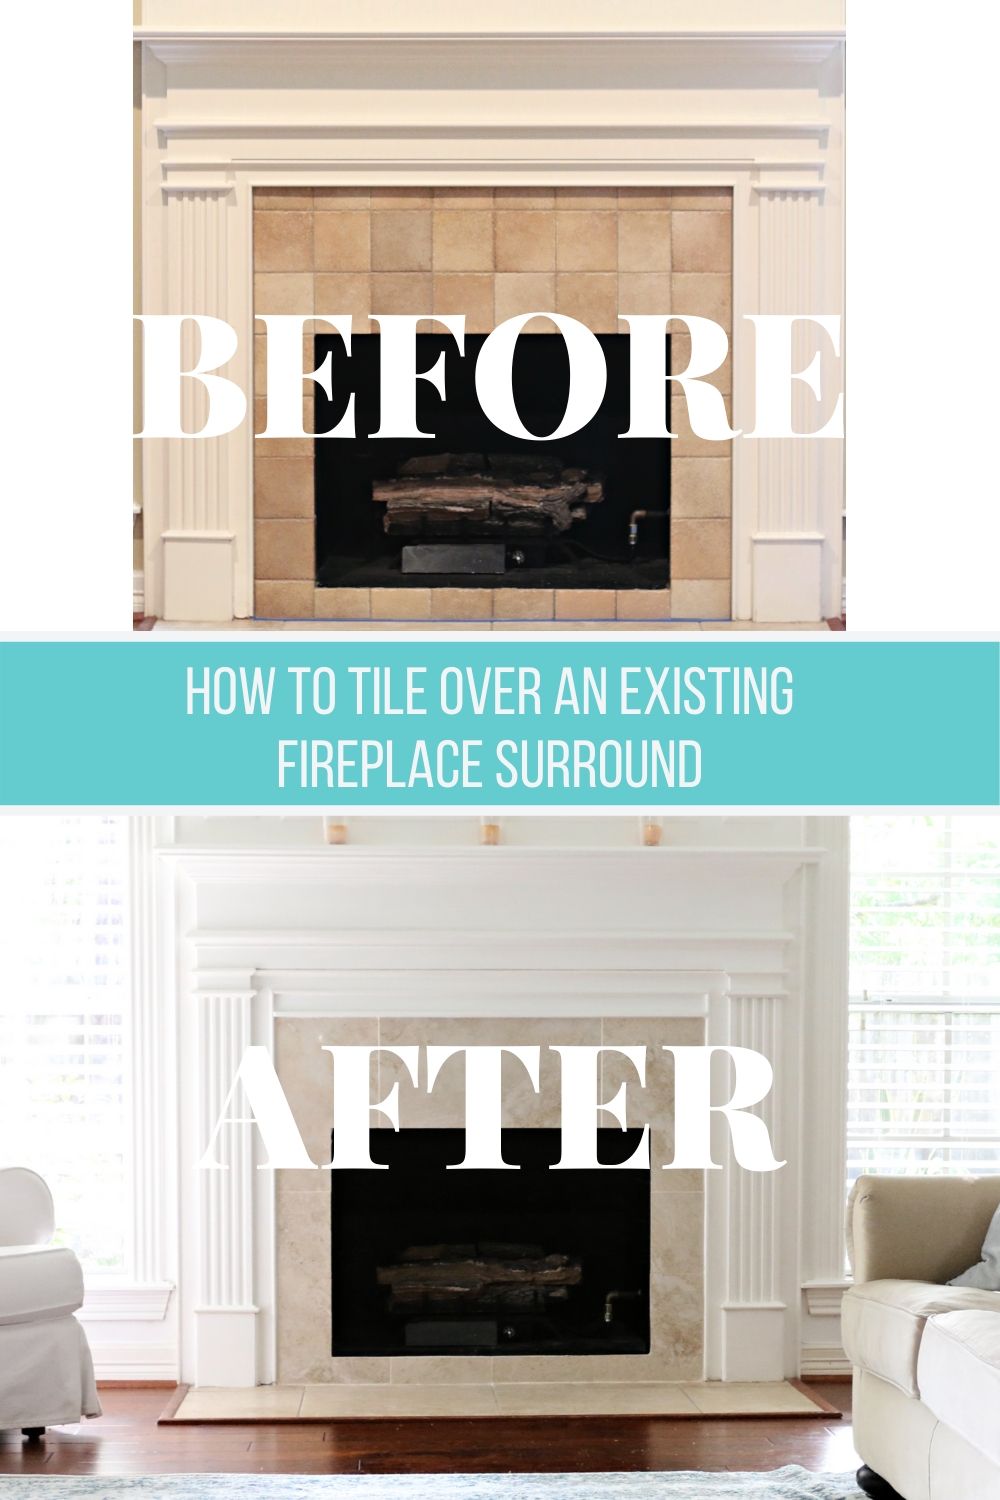 How To Tile Over An Existing Fireplace, What Tile Adhesive To Use In Fireplace